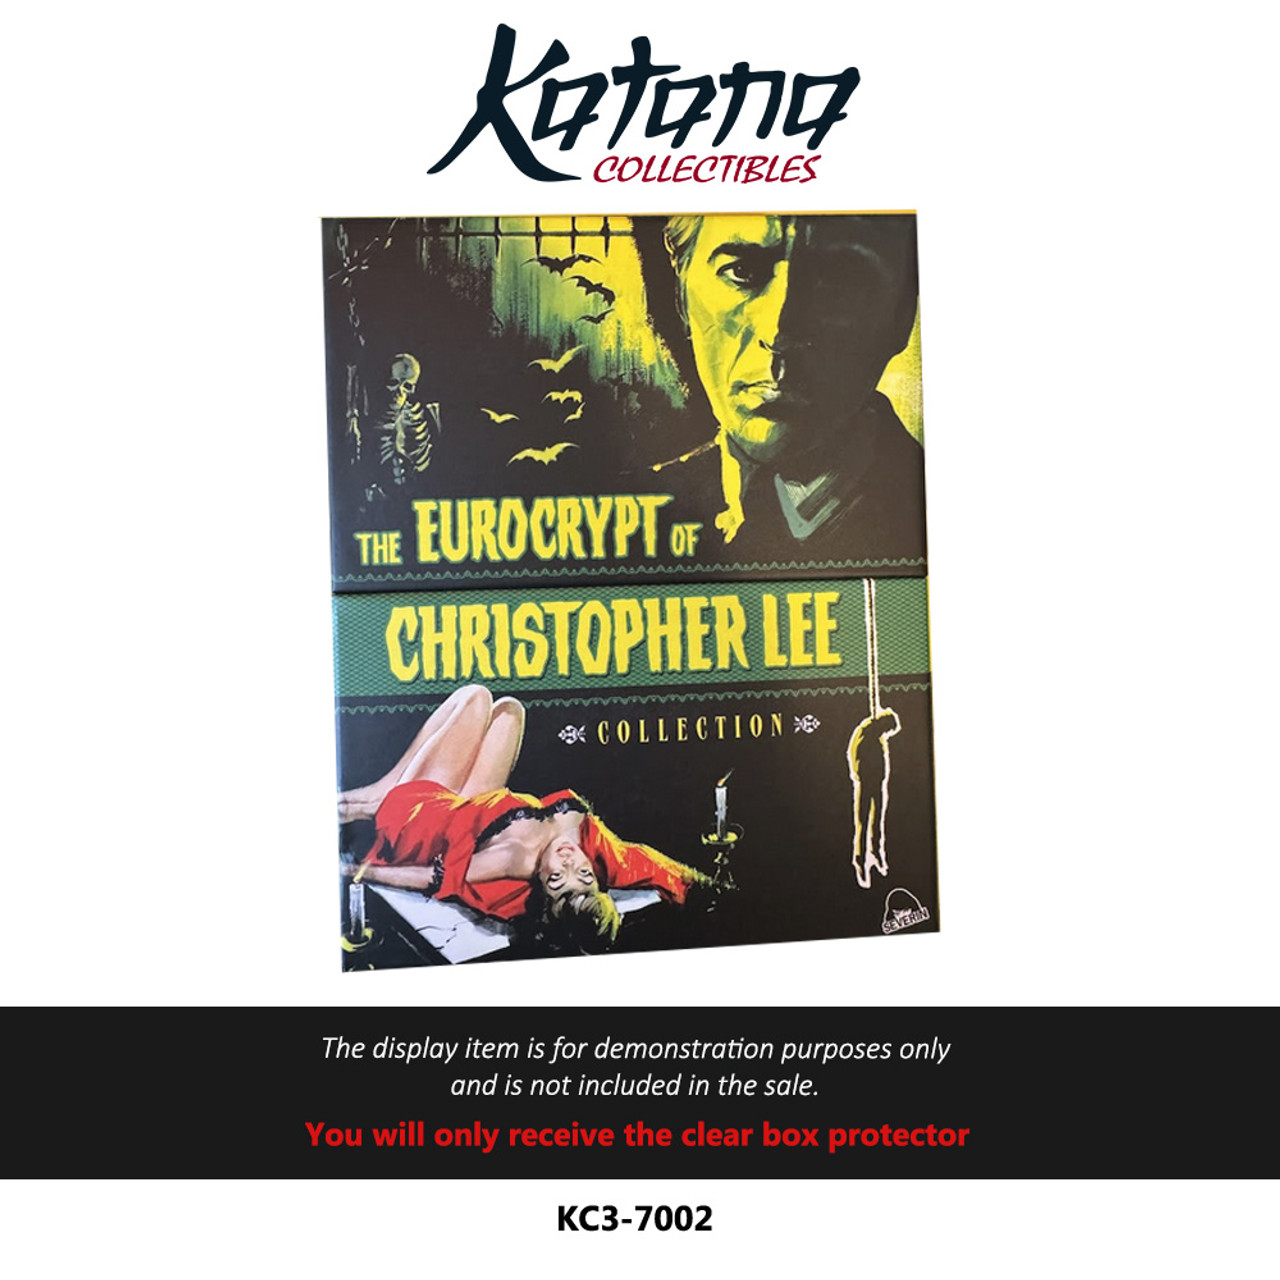 Katana Collectibles Protector For The Eurocrypt of Christopher Lee, Volume 1, Severin Films